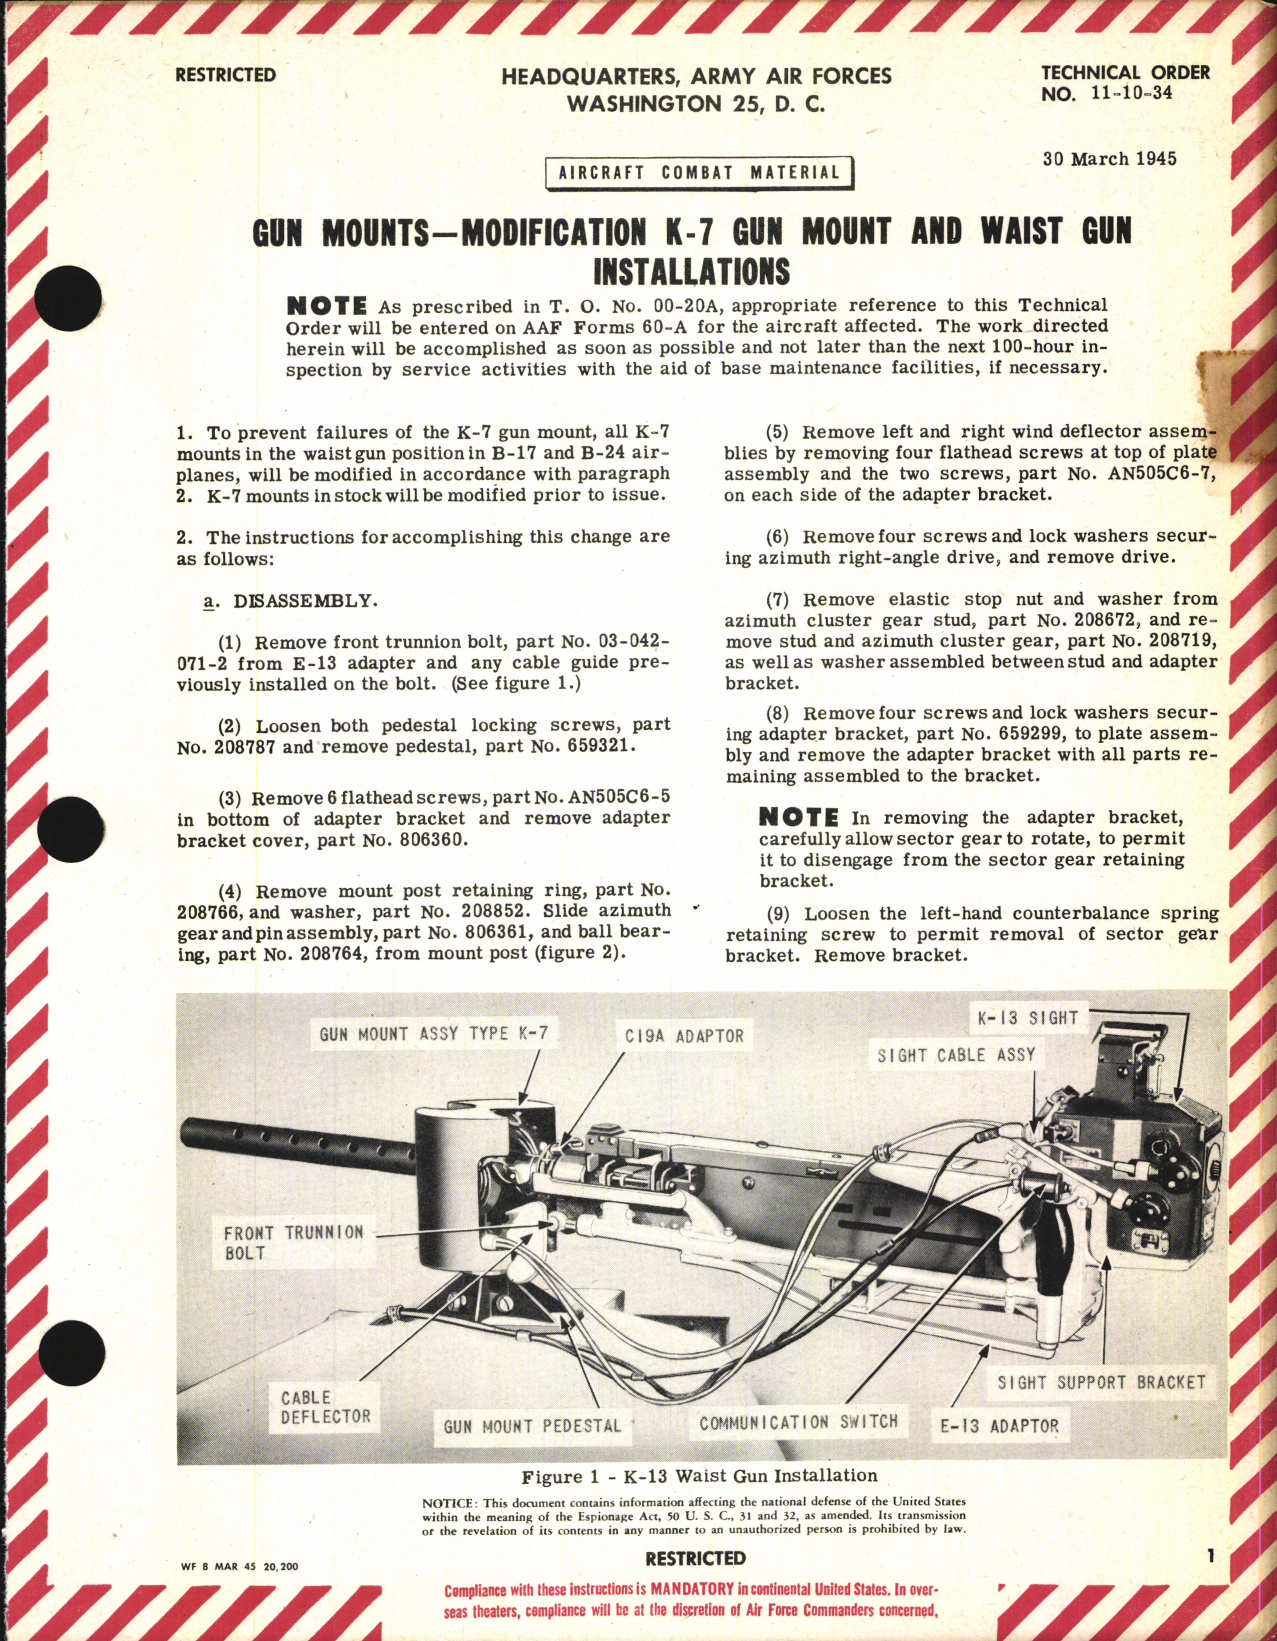 Sample page 1 from AirCorps Library document: Modification of K-7 Gun Mount and Waist Gun Installations